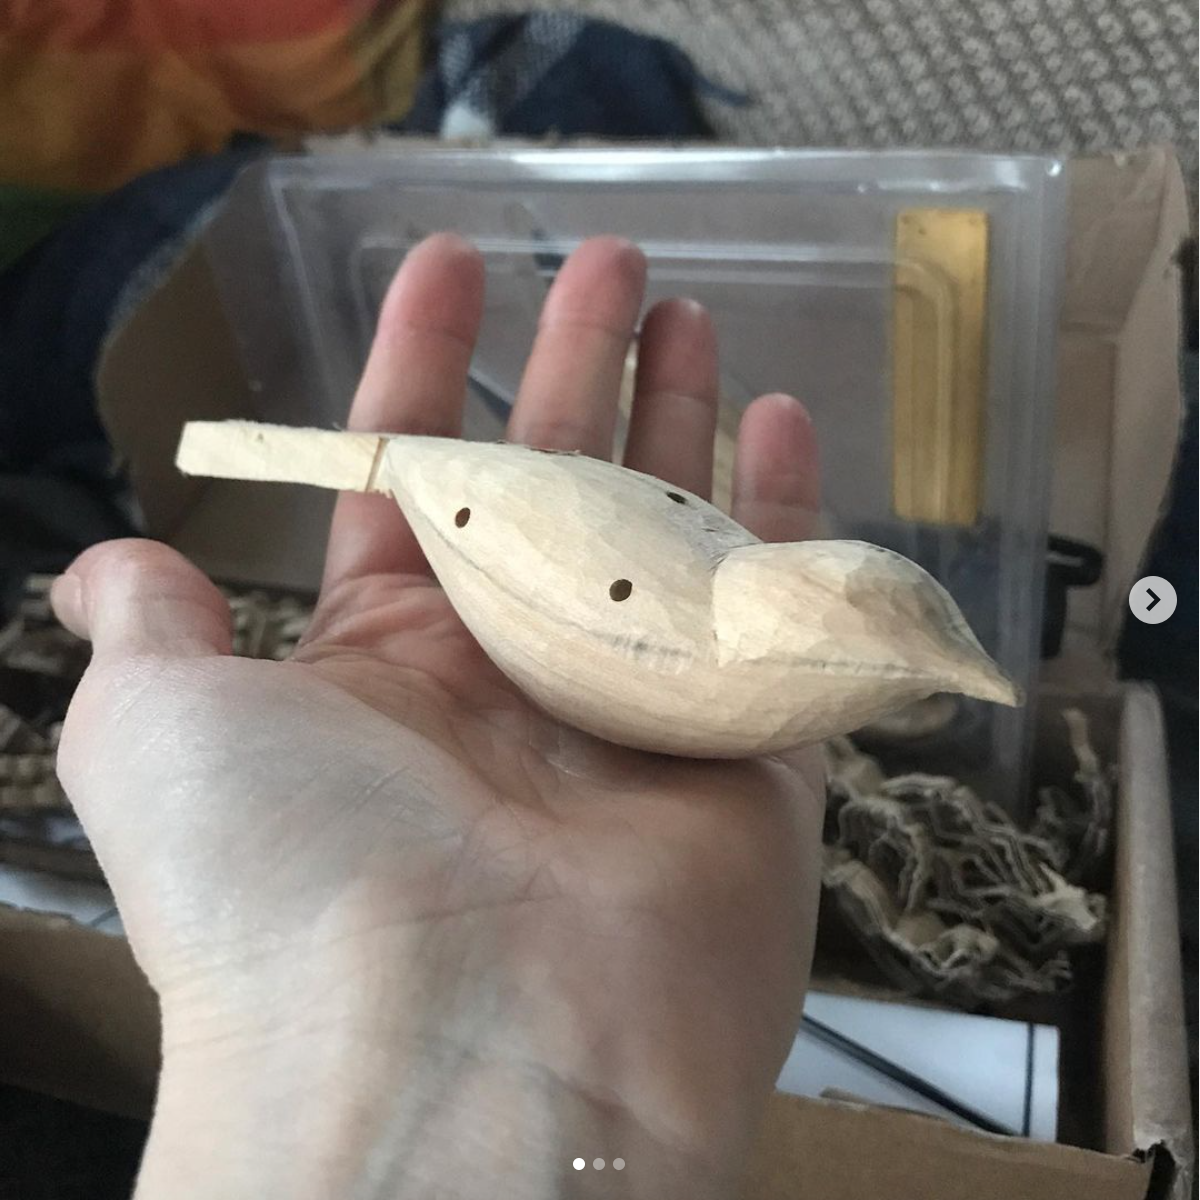  Swallow carved by a tutorial participant, January 2021 